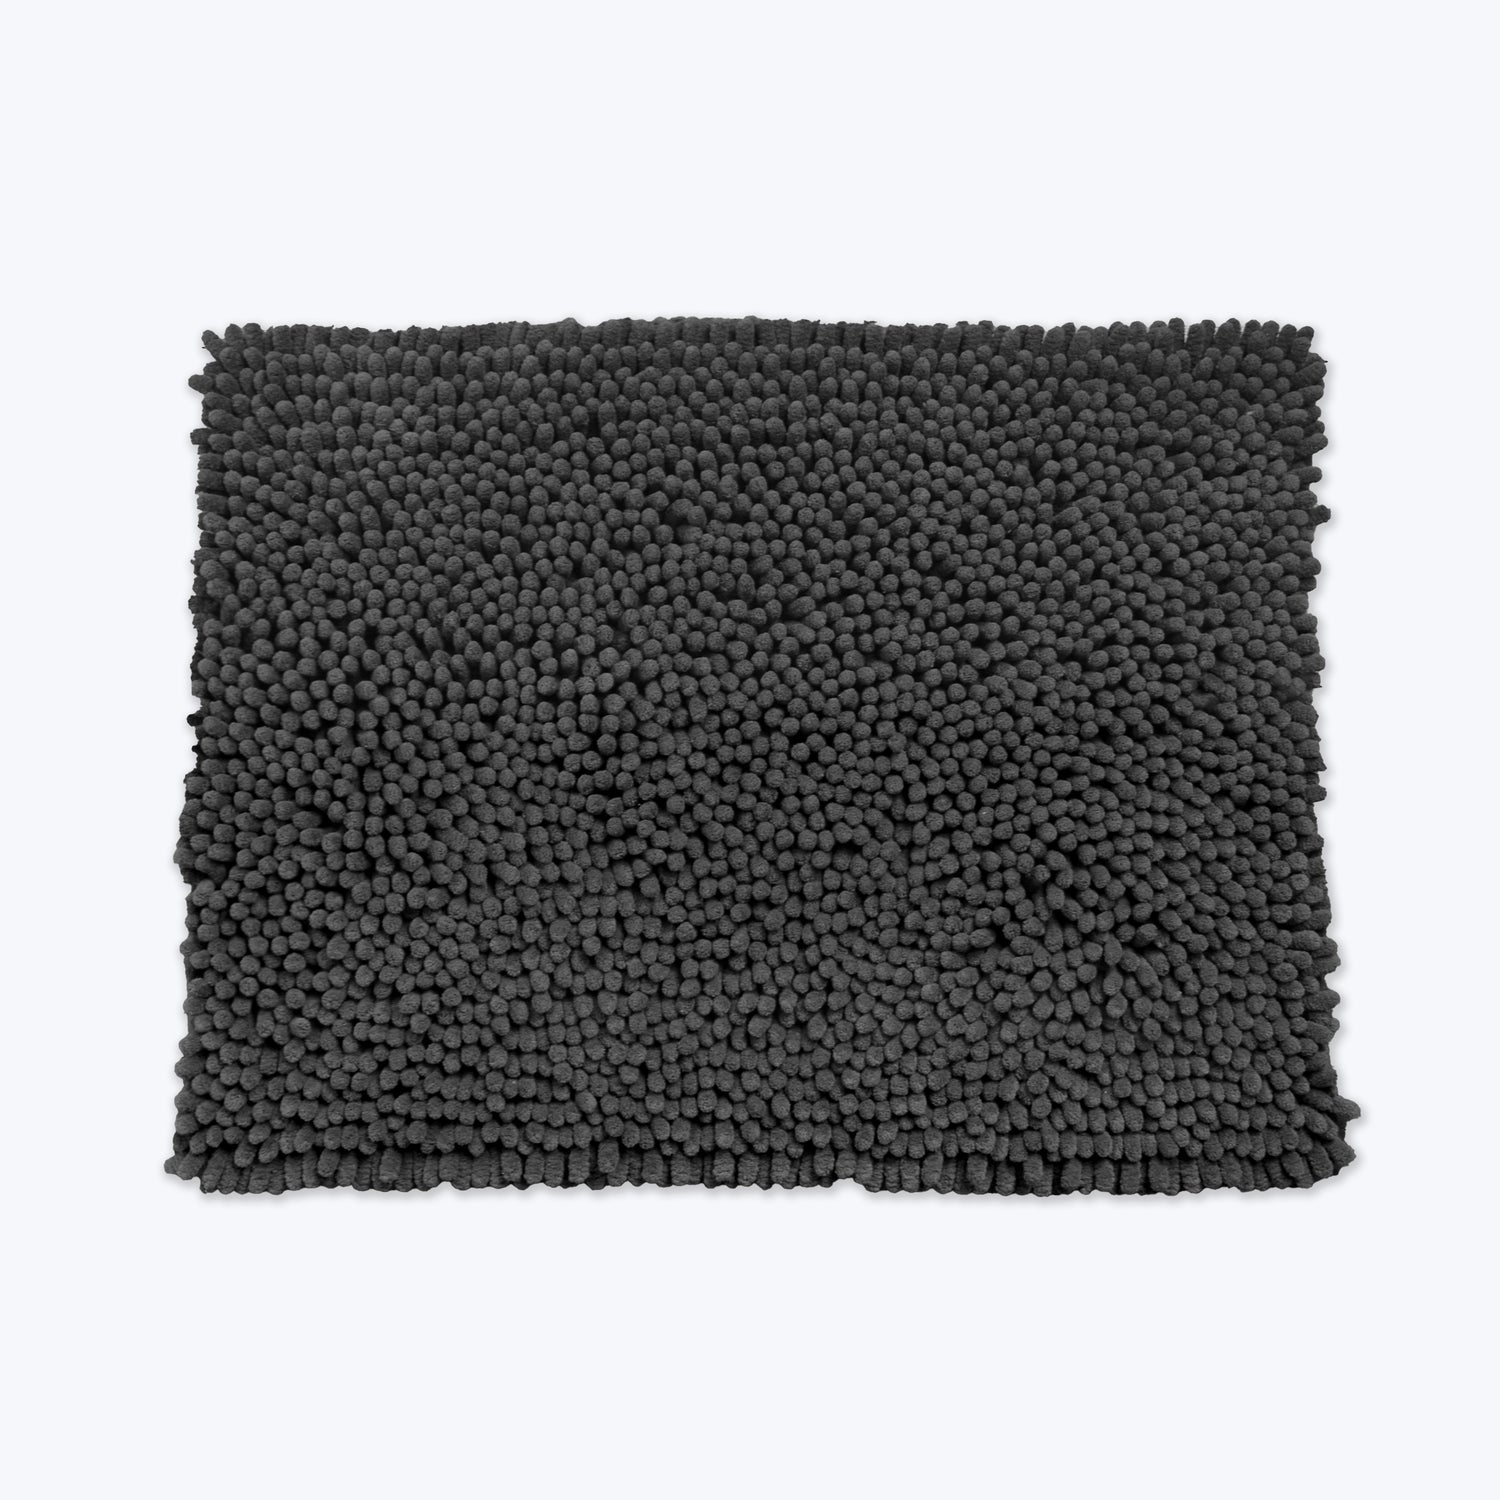 Charcoal grey chunky bobble bath mat, made from super plush chenille